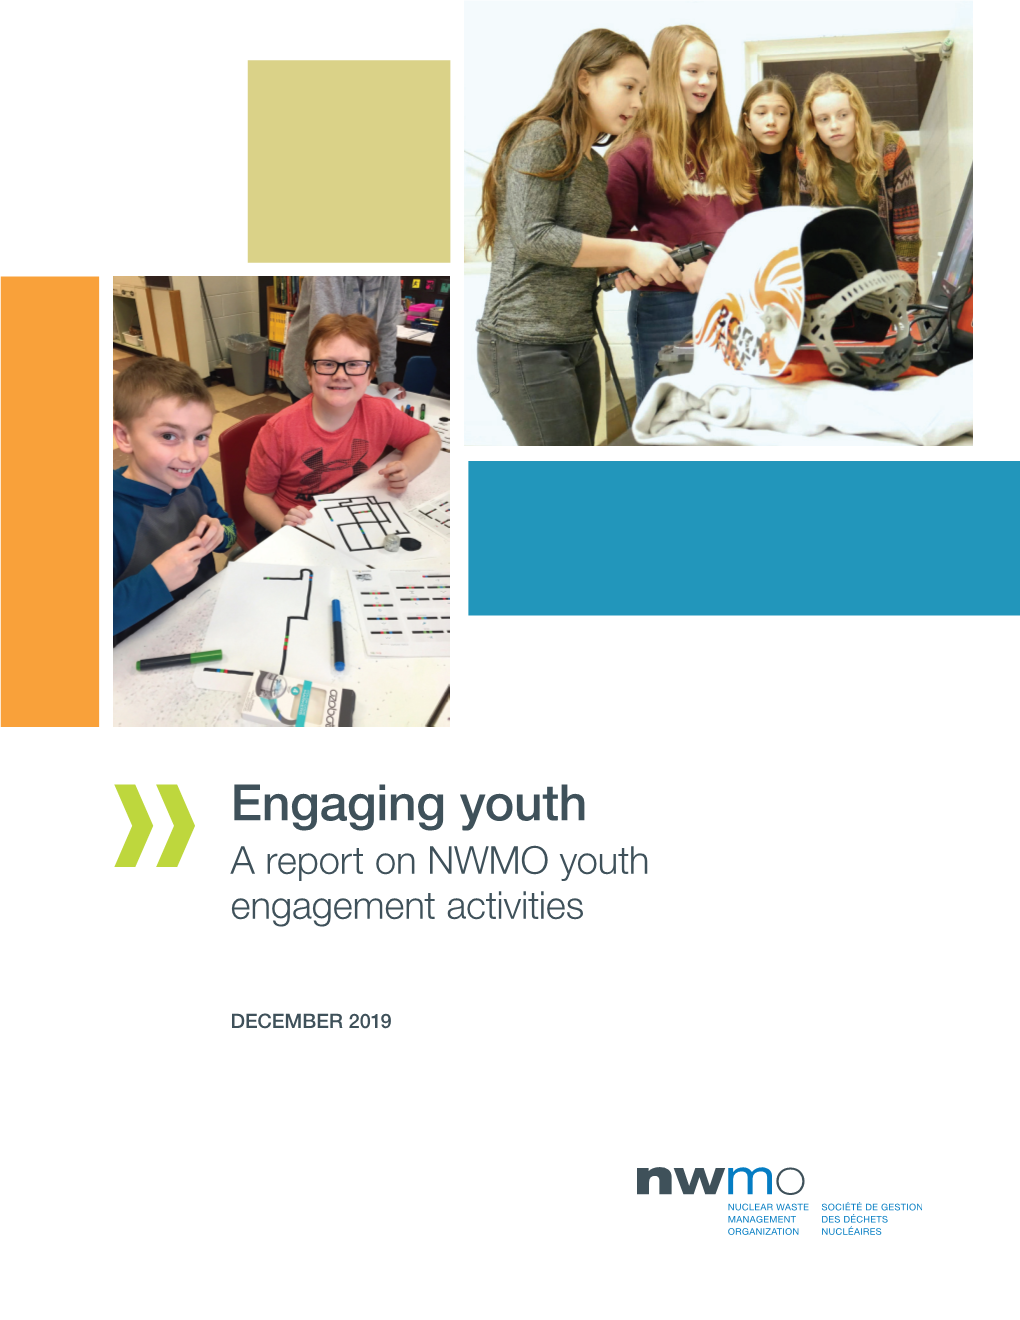 Engaging Youth a Report on NWMO Youth Engagement Activities